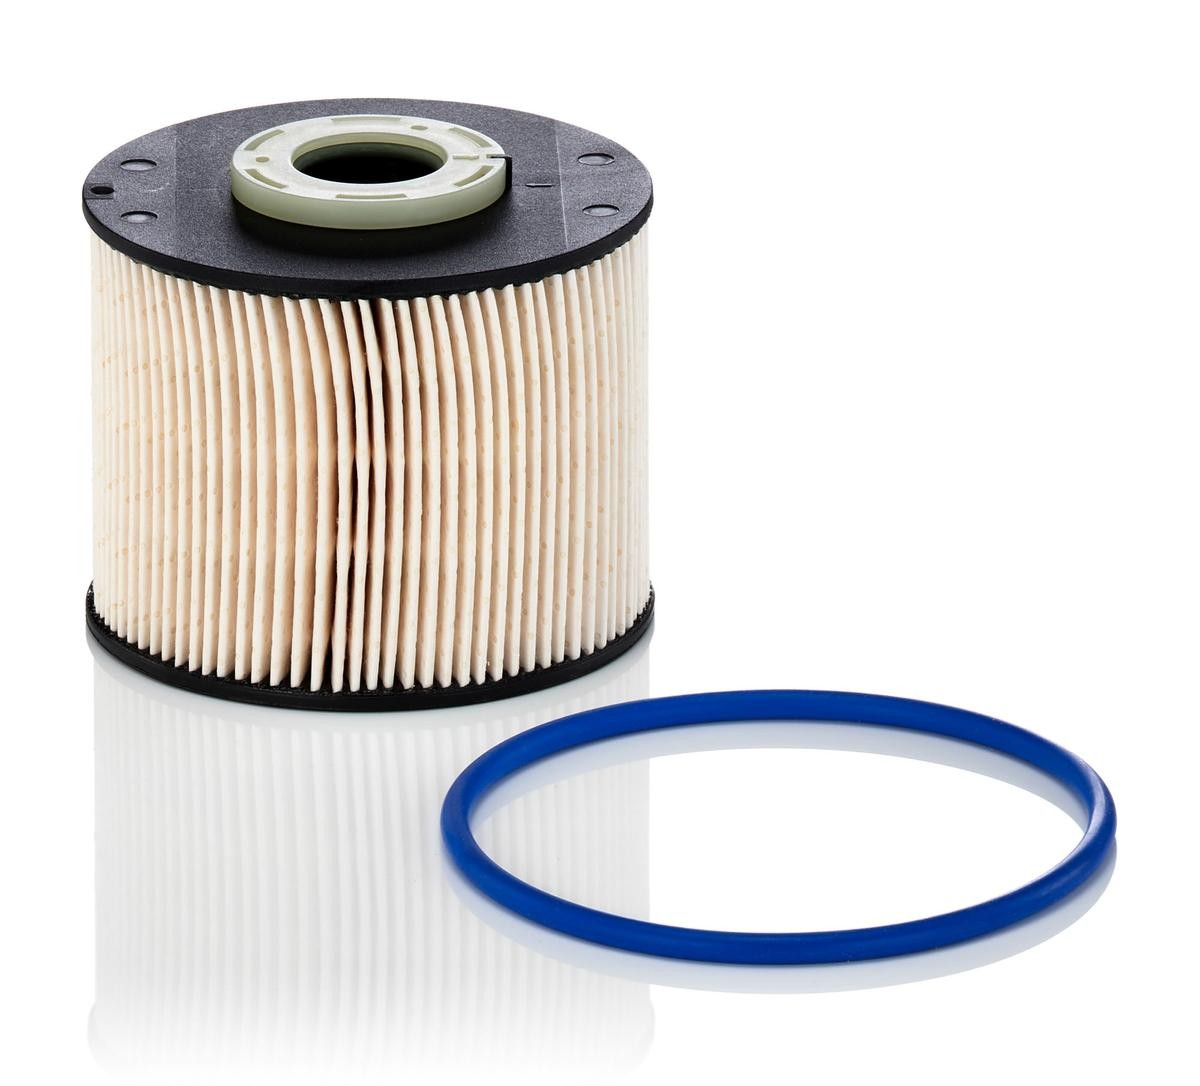 PU 927 x MANN-FILTER Fuel filters Ford S-MAX review